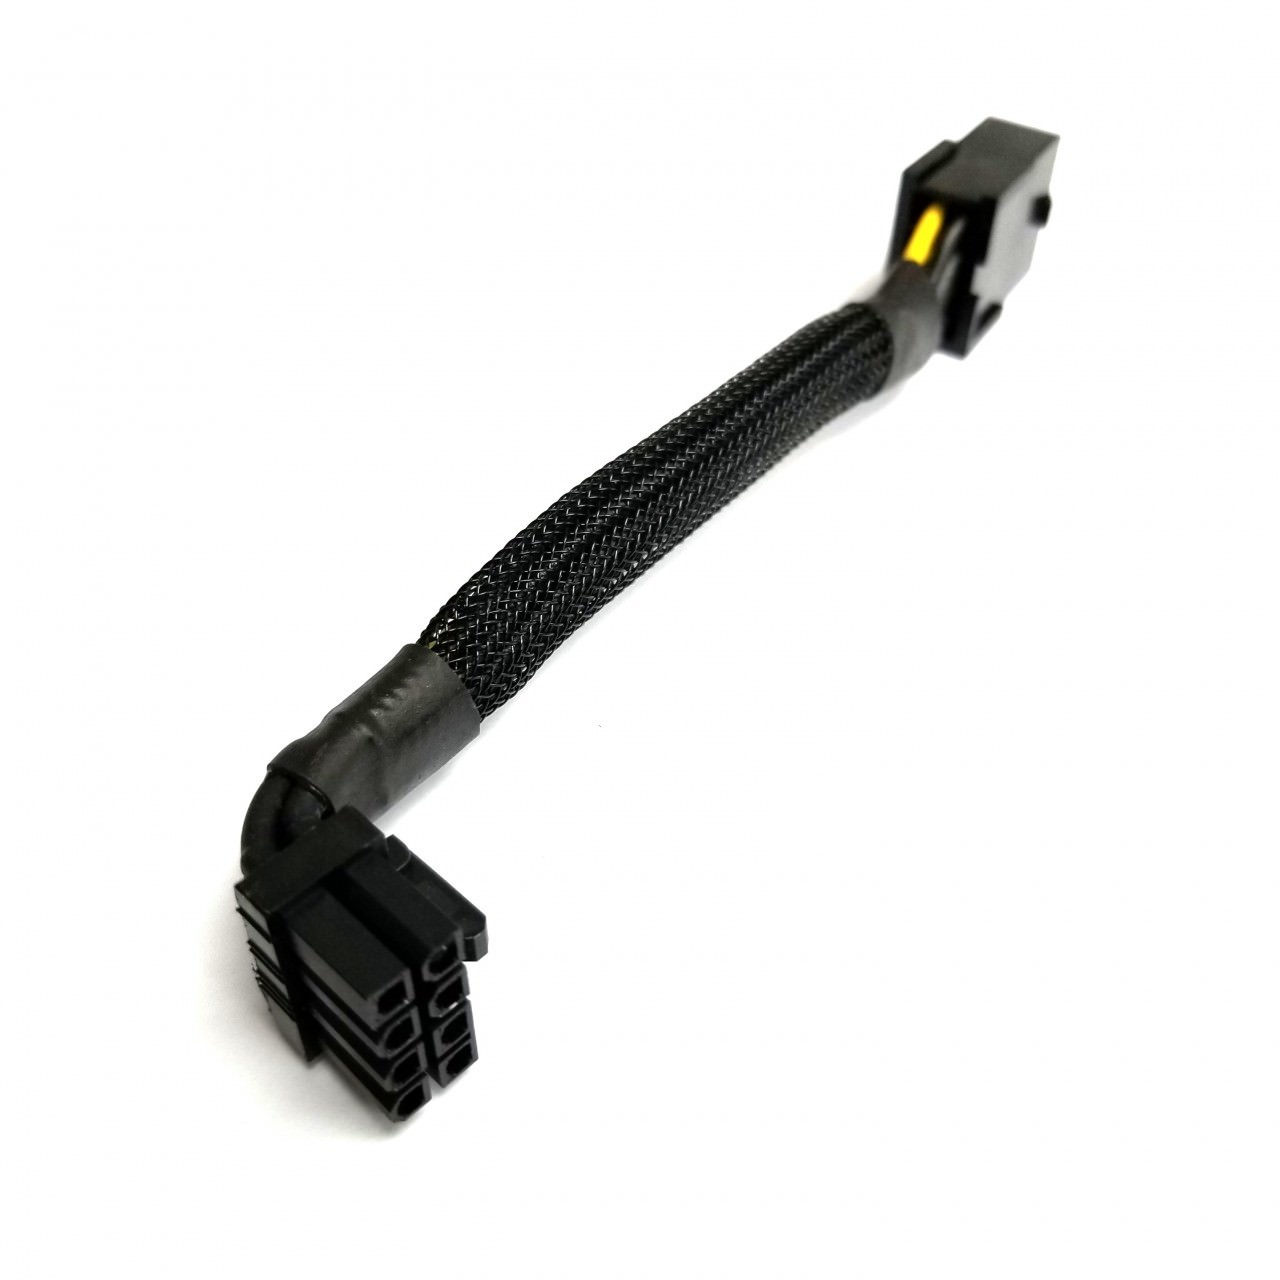 https://www.moddiy.com/product_images/d/585/PCIE_90%C2%B0_L-Shape_Mini_Low-Profile_GPU_Power_Cable_%288-Pin_Up-Angle%29__28642_zoom.jpg